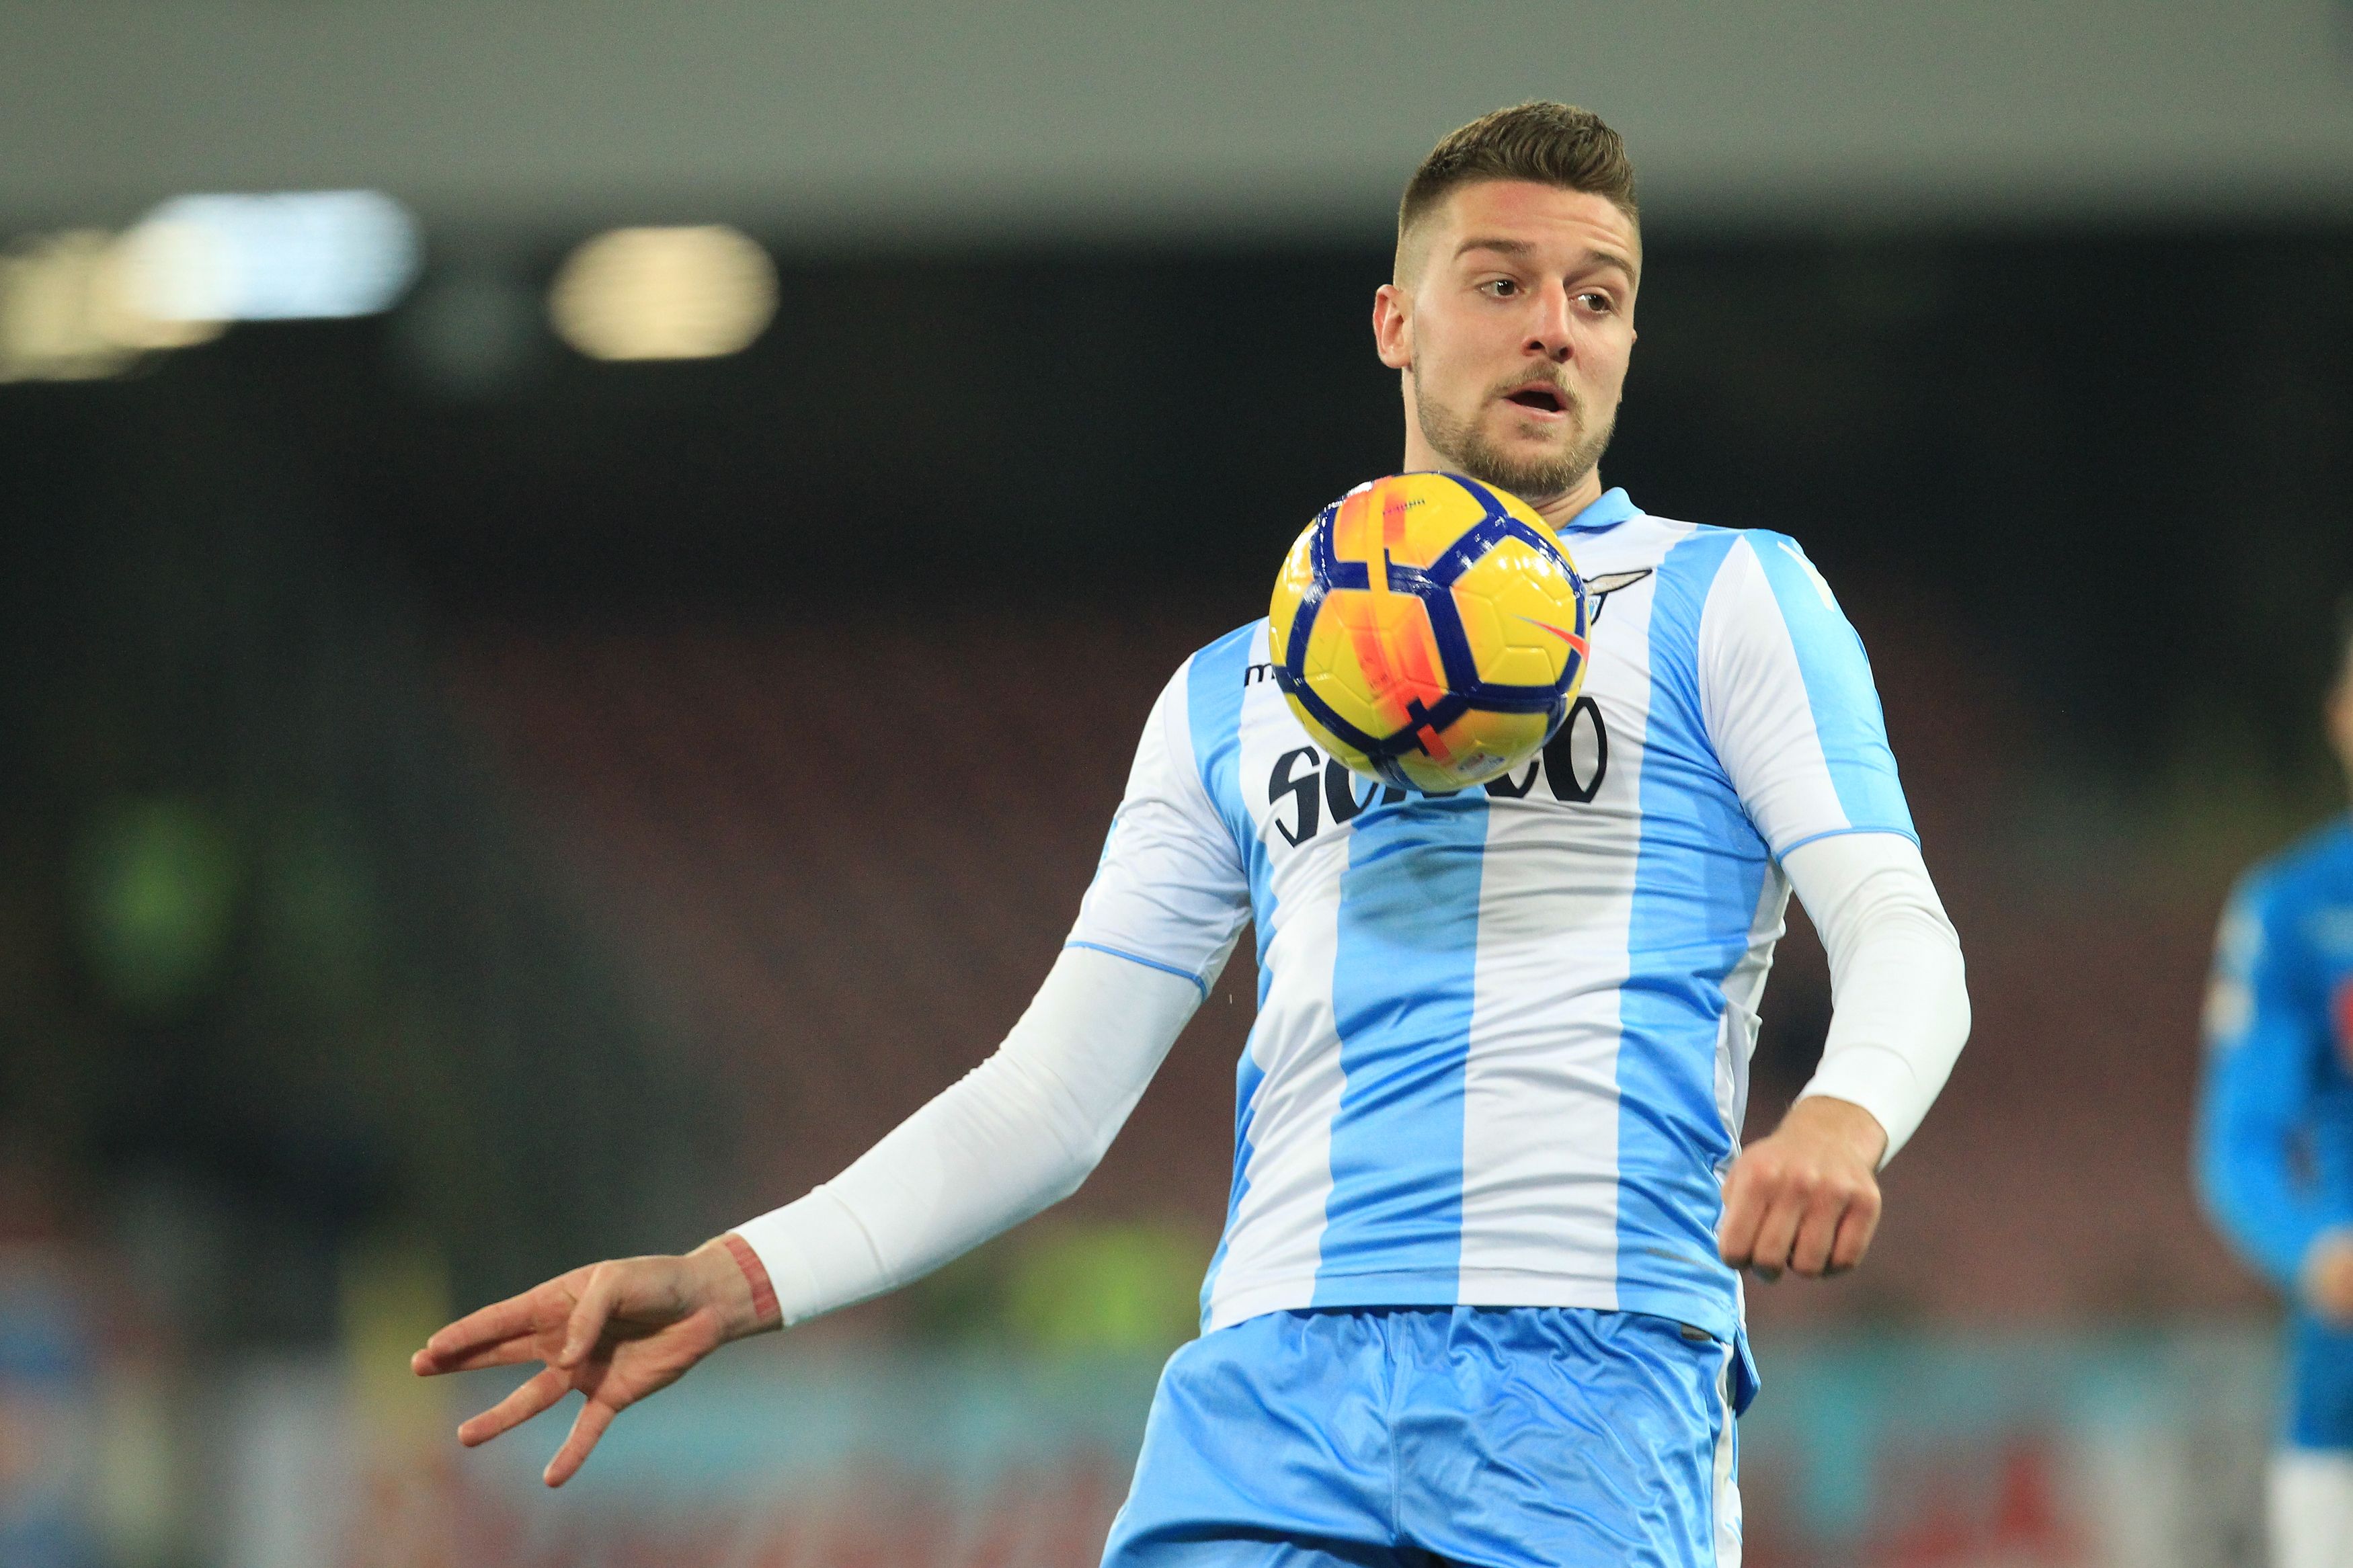 Lazio's Serbian midfielder Sergej Milinkovic-Savic controls the ball during the Italian Serie A football match Napoli versus Lazio on February 10, 2018 at San Paolo stadium in Naples.  / AFP PHOTO / CARLO HERMANN        (Photo credit should read CARLO HERMANN/AFP/Getty Images)